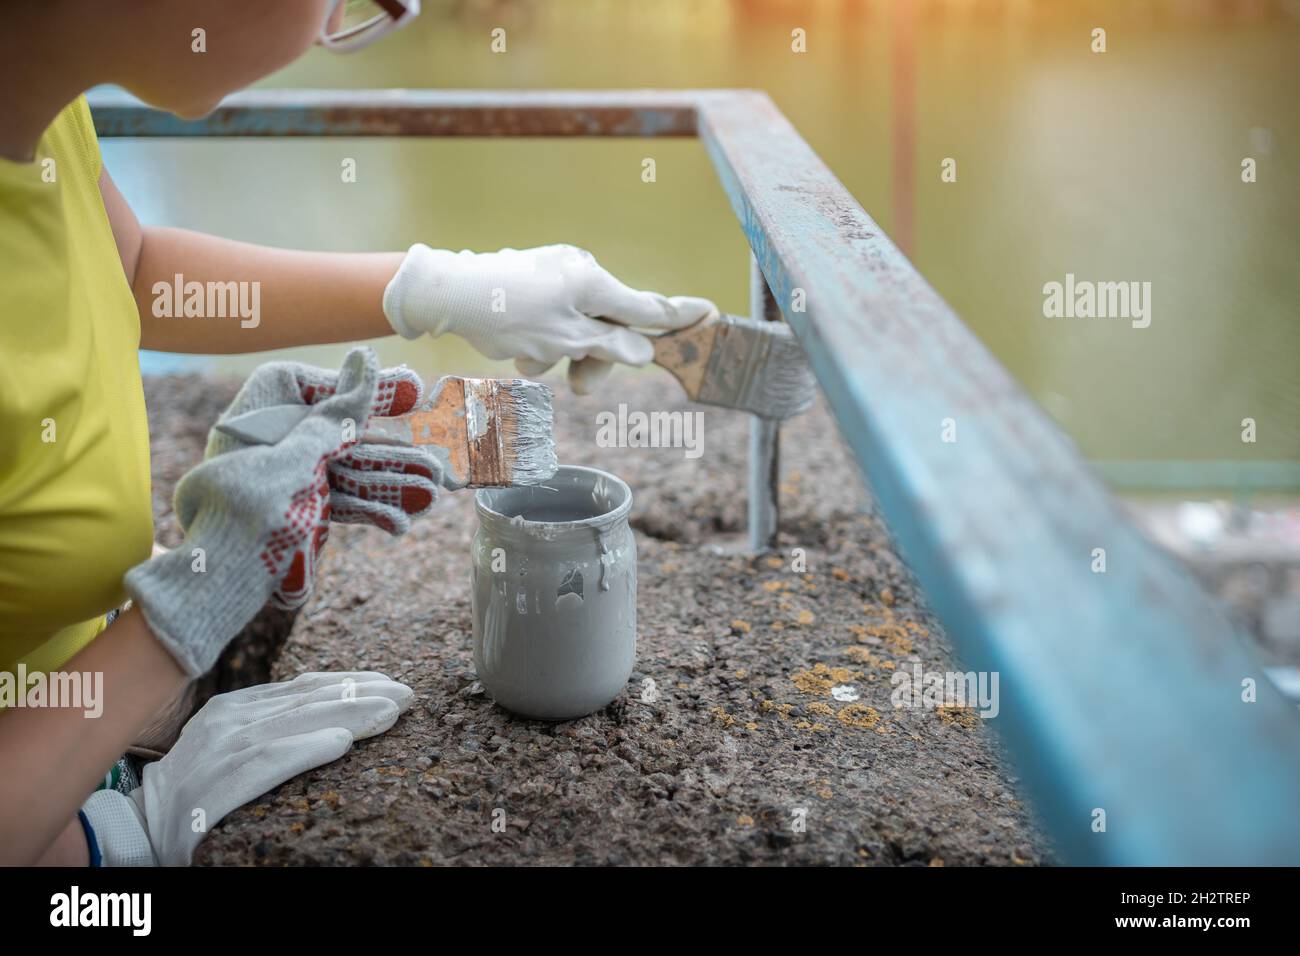 volunteer worker painting with brush or roller and renovate railing or fence Stock Photo